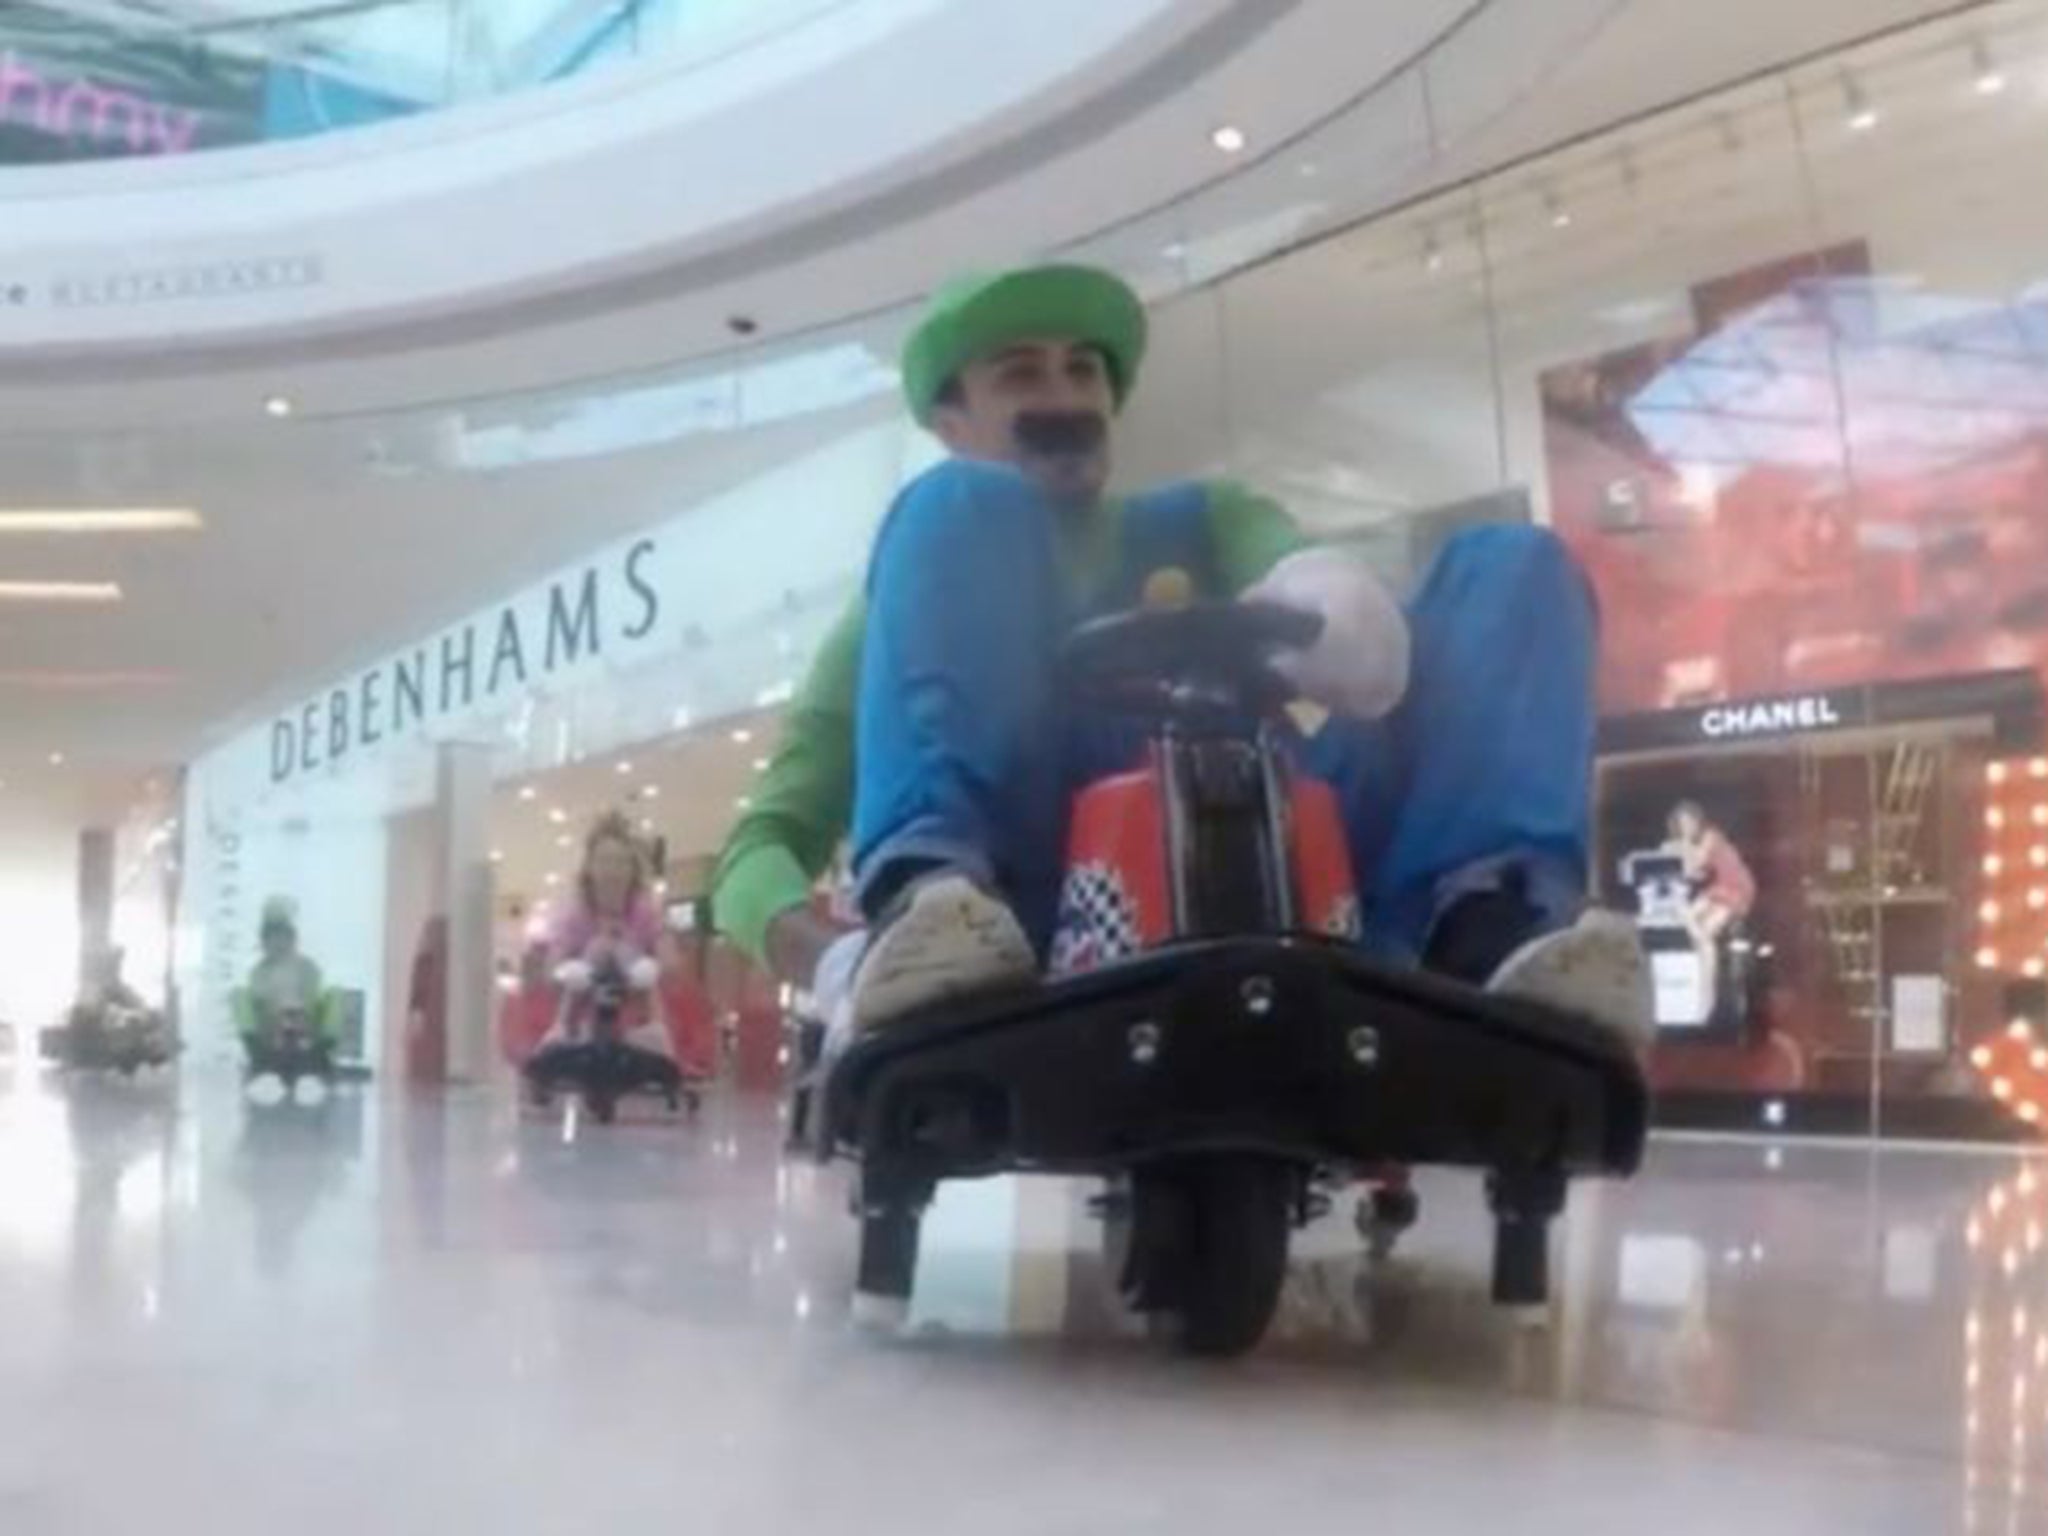 Base37's idea to dress up as characters from the video game Mario Kart and tear through the Westfield shopping centre has struck a chord